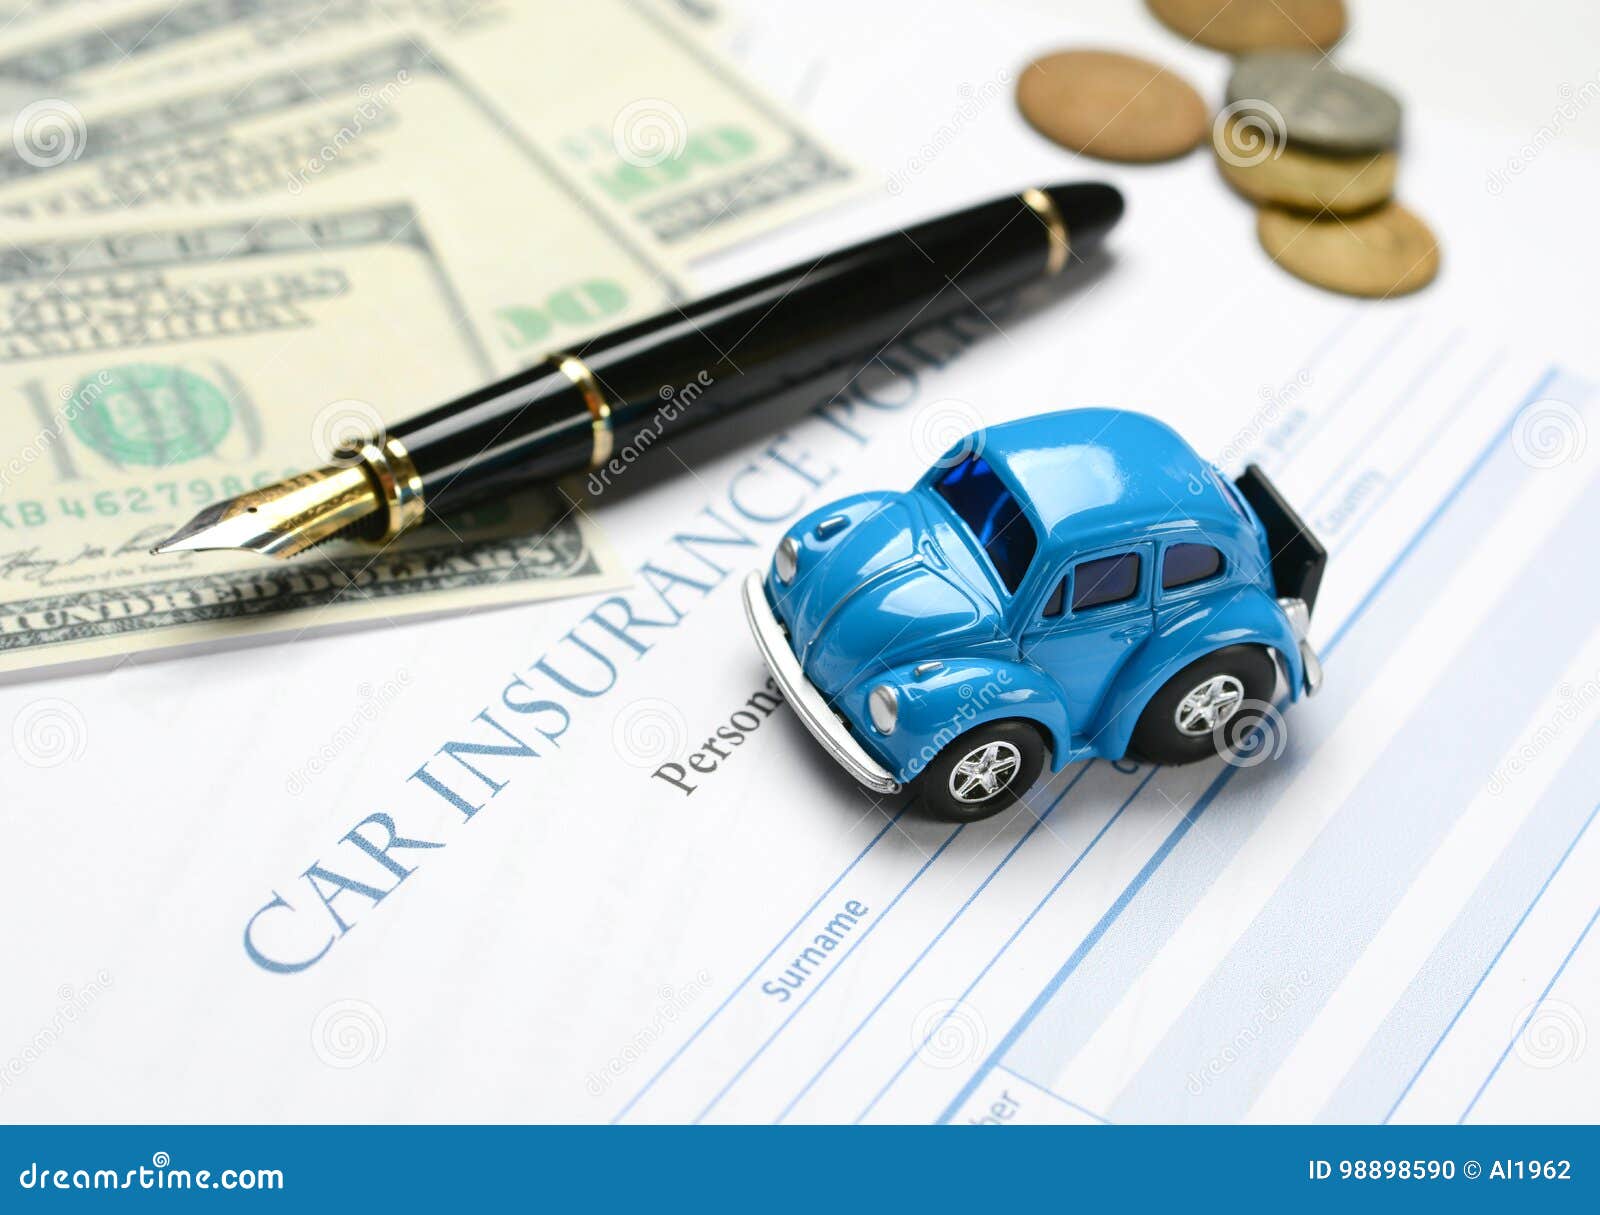 Car Insurance Policy With Pen And Money Around Stock Photo Image of agent, finance 98898590